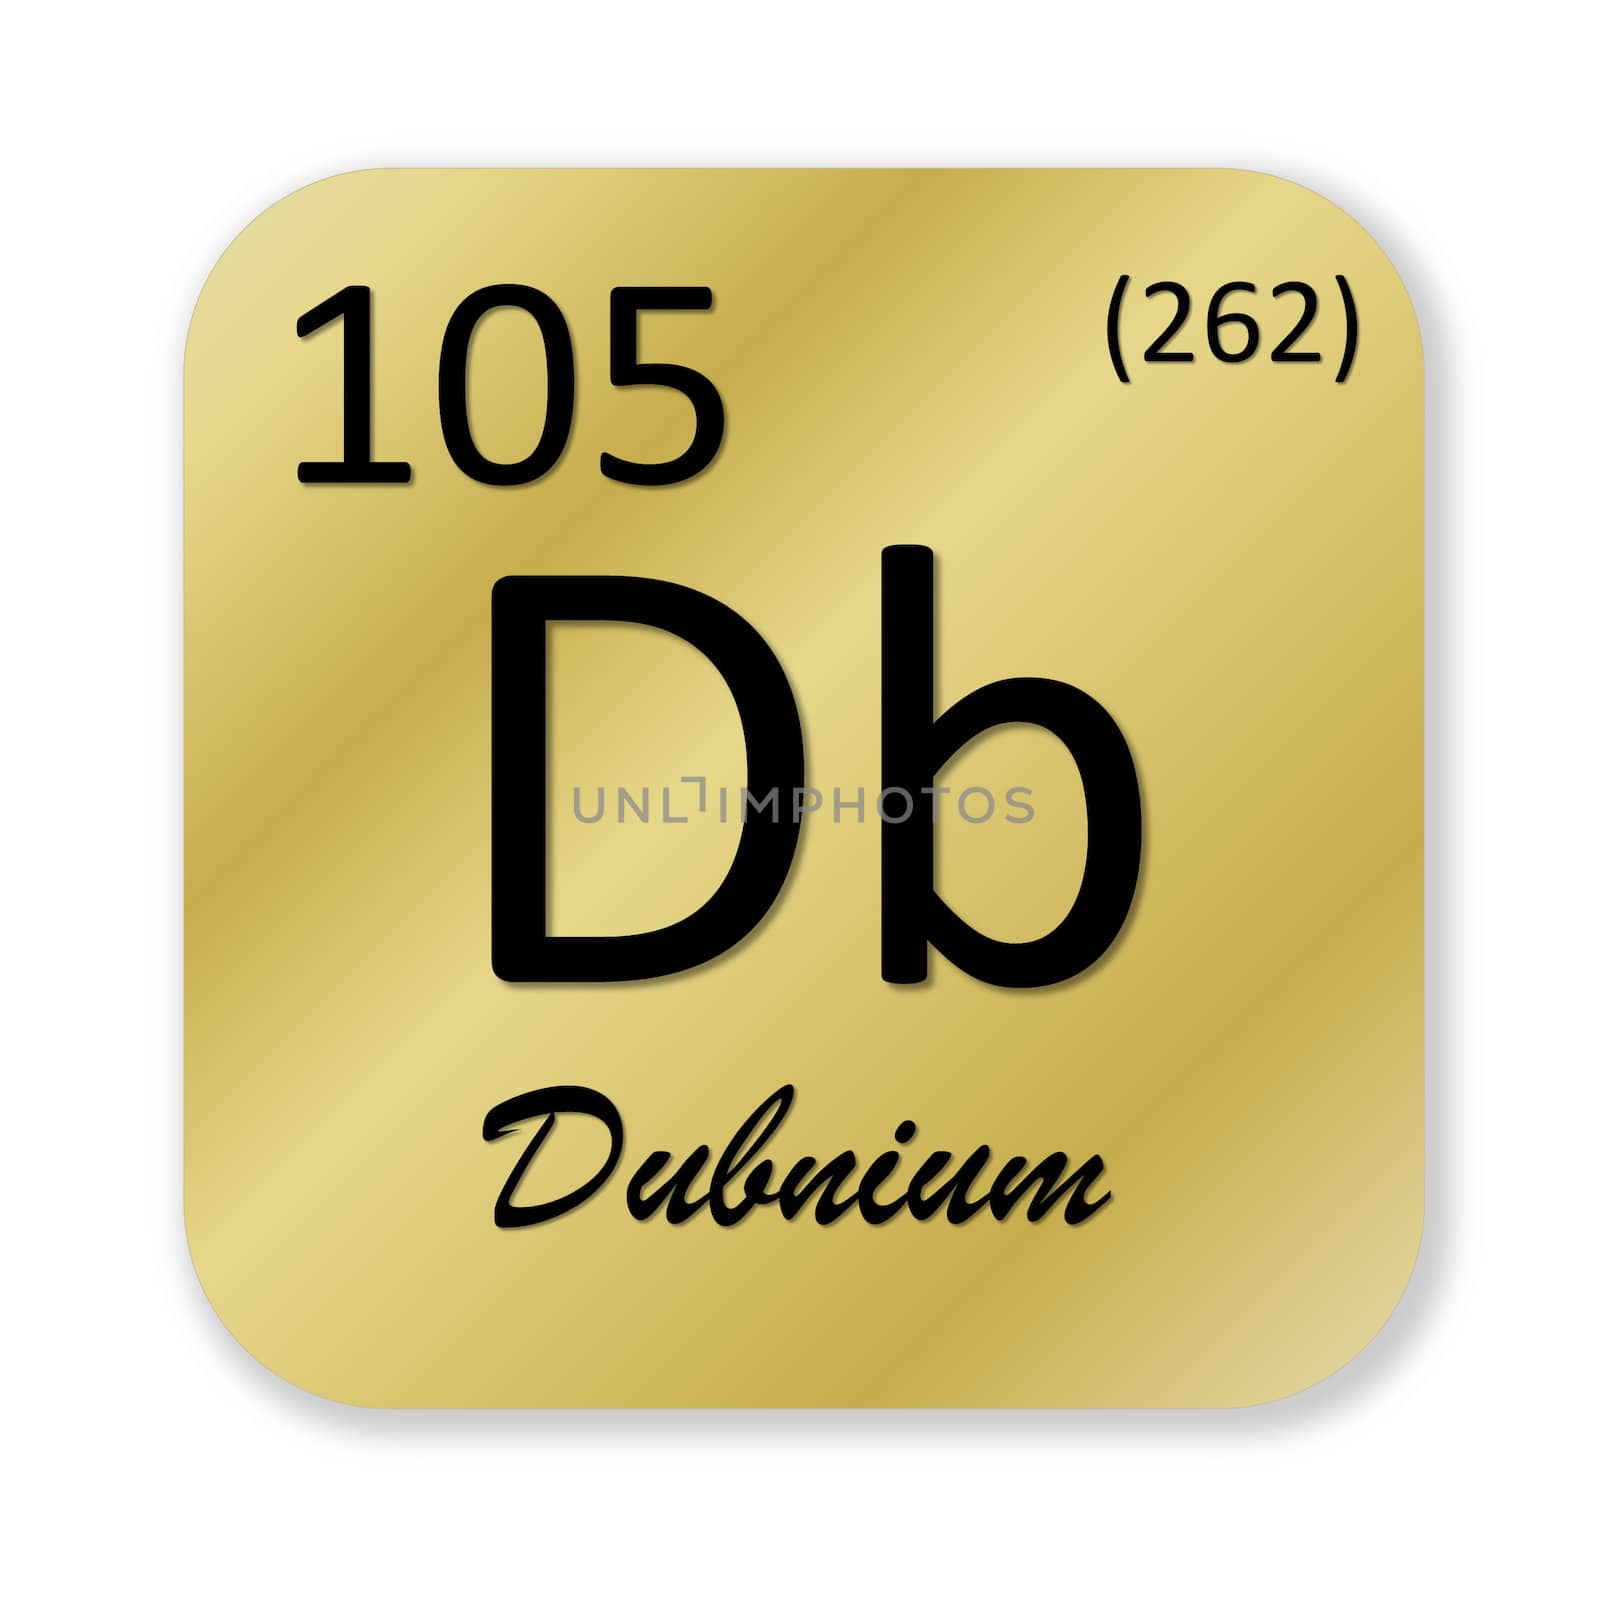 Black dubnium element into golden square shape isolated in white background